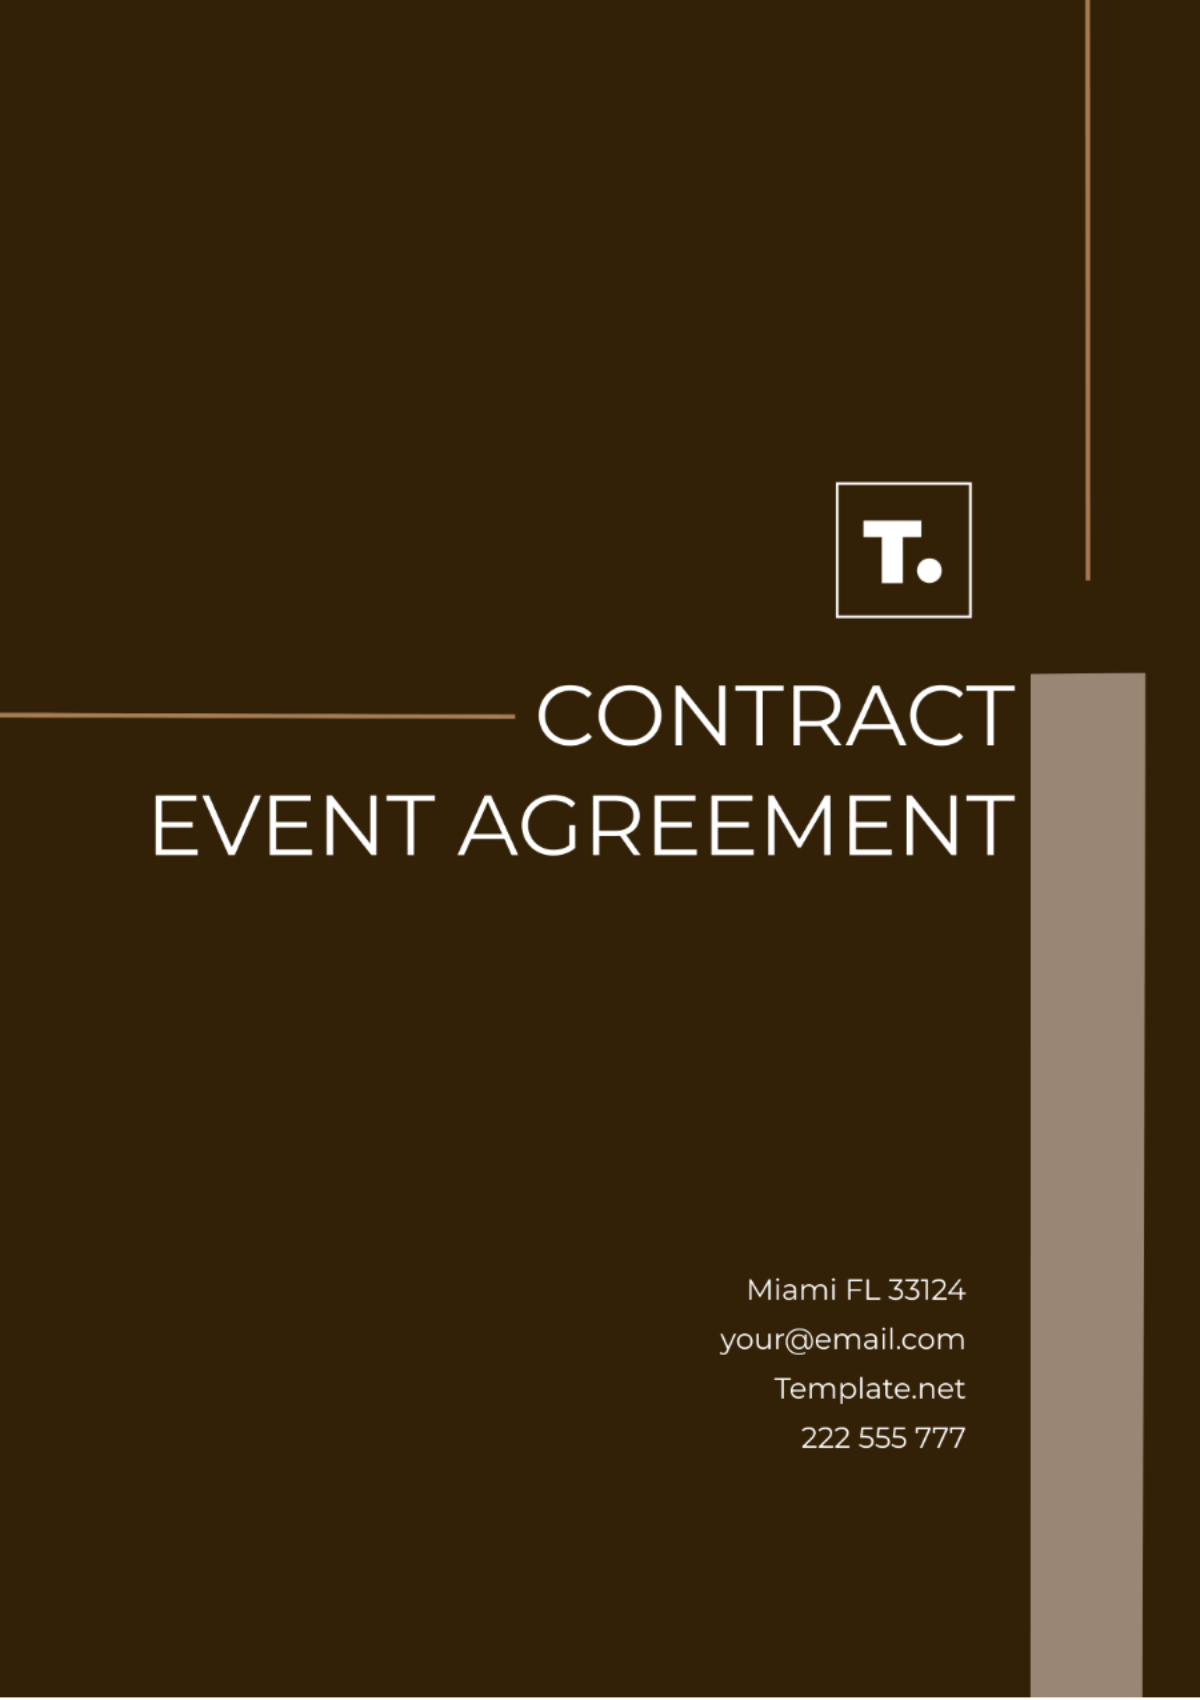 Free Event Agreement Contract Template